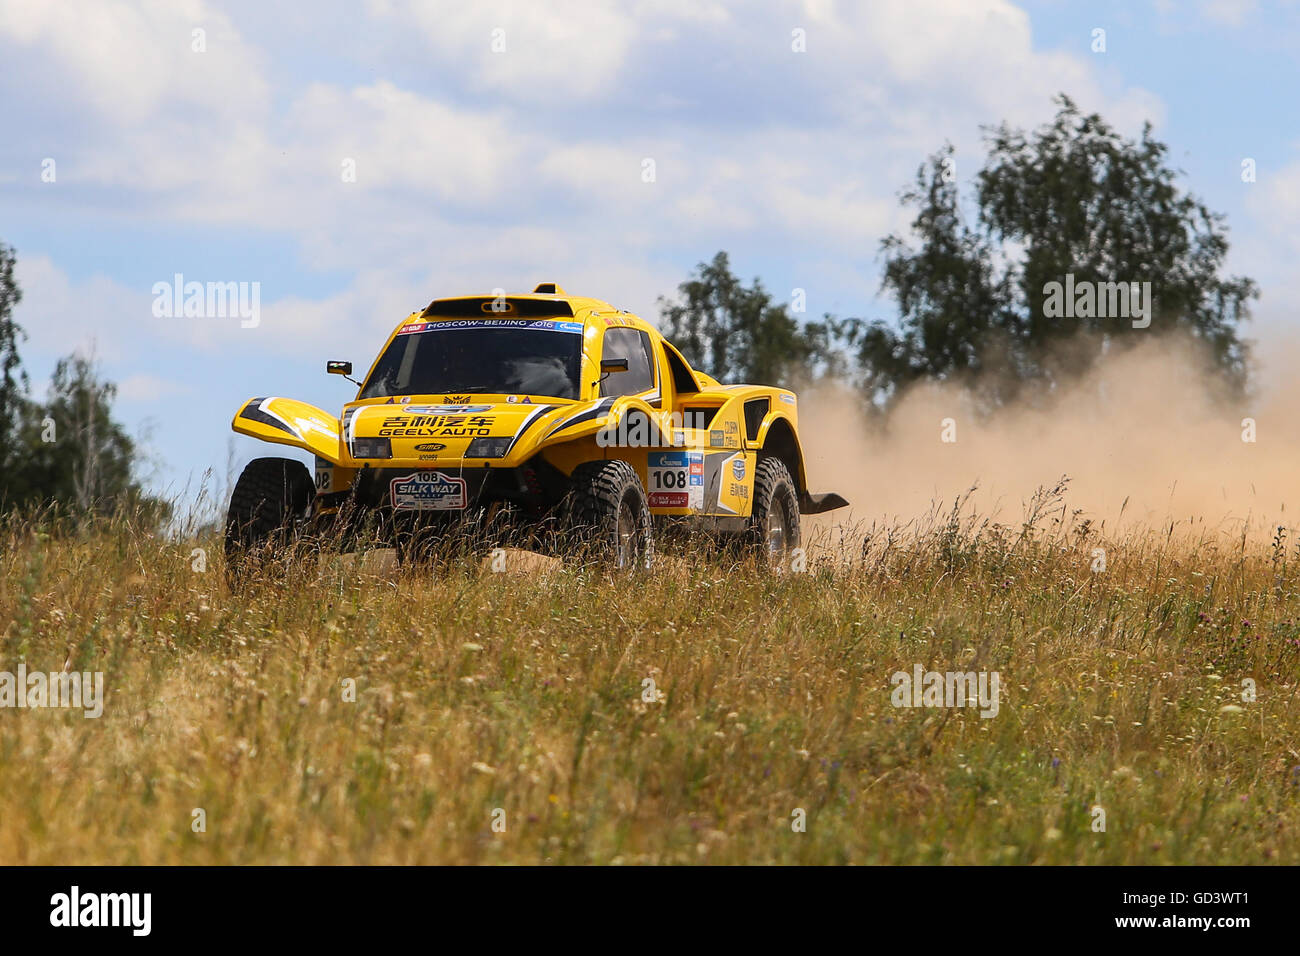 Ufa. 11th July, 2016. Han Wei and Jean-Pierre Garcin of Geely Boyue Hanwei SMG Team of China compete during the third stage of the Moscow-Beijing Silk Road rally 2016 in Ufa, Russia on July 11, 2016. © Maxim Ozerov/Xinhua/Alamy Live News Stock Photo